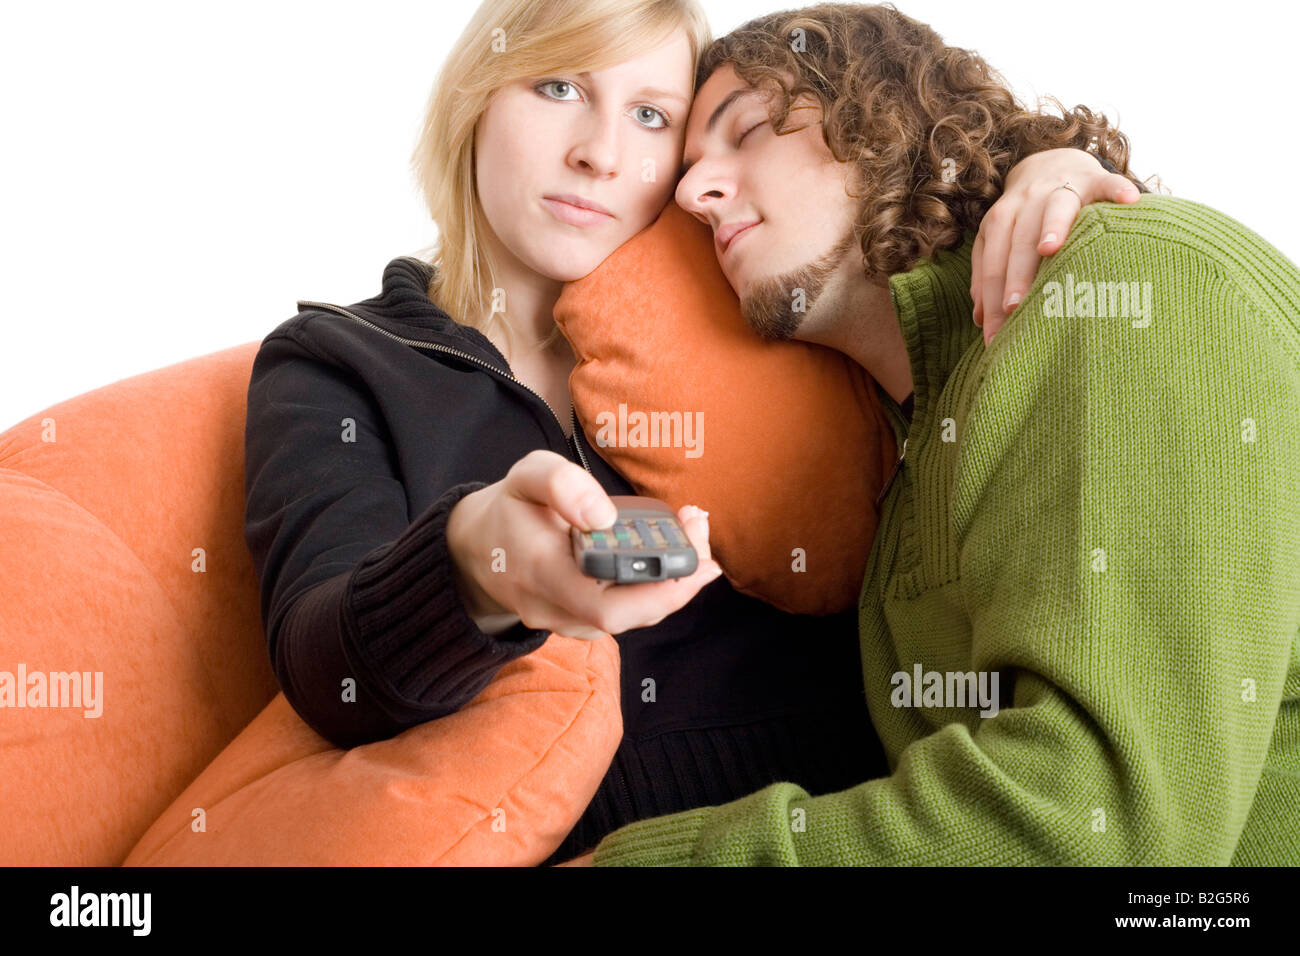 couple pair tv remote control shifting chanel surfing Stock Photo